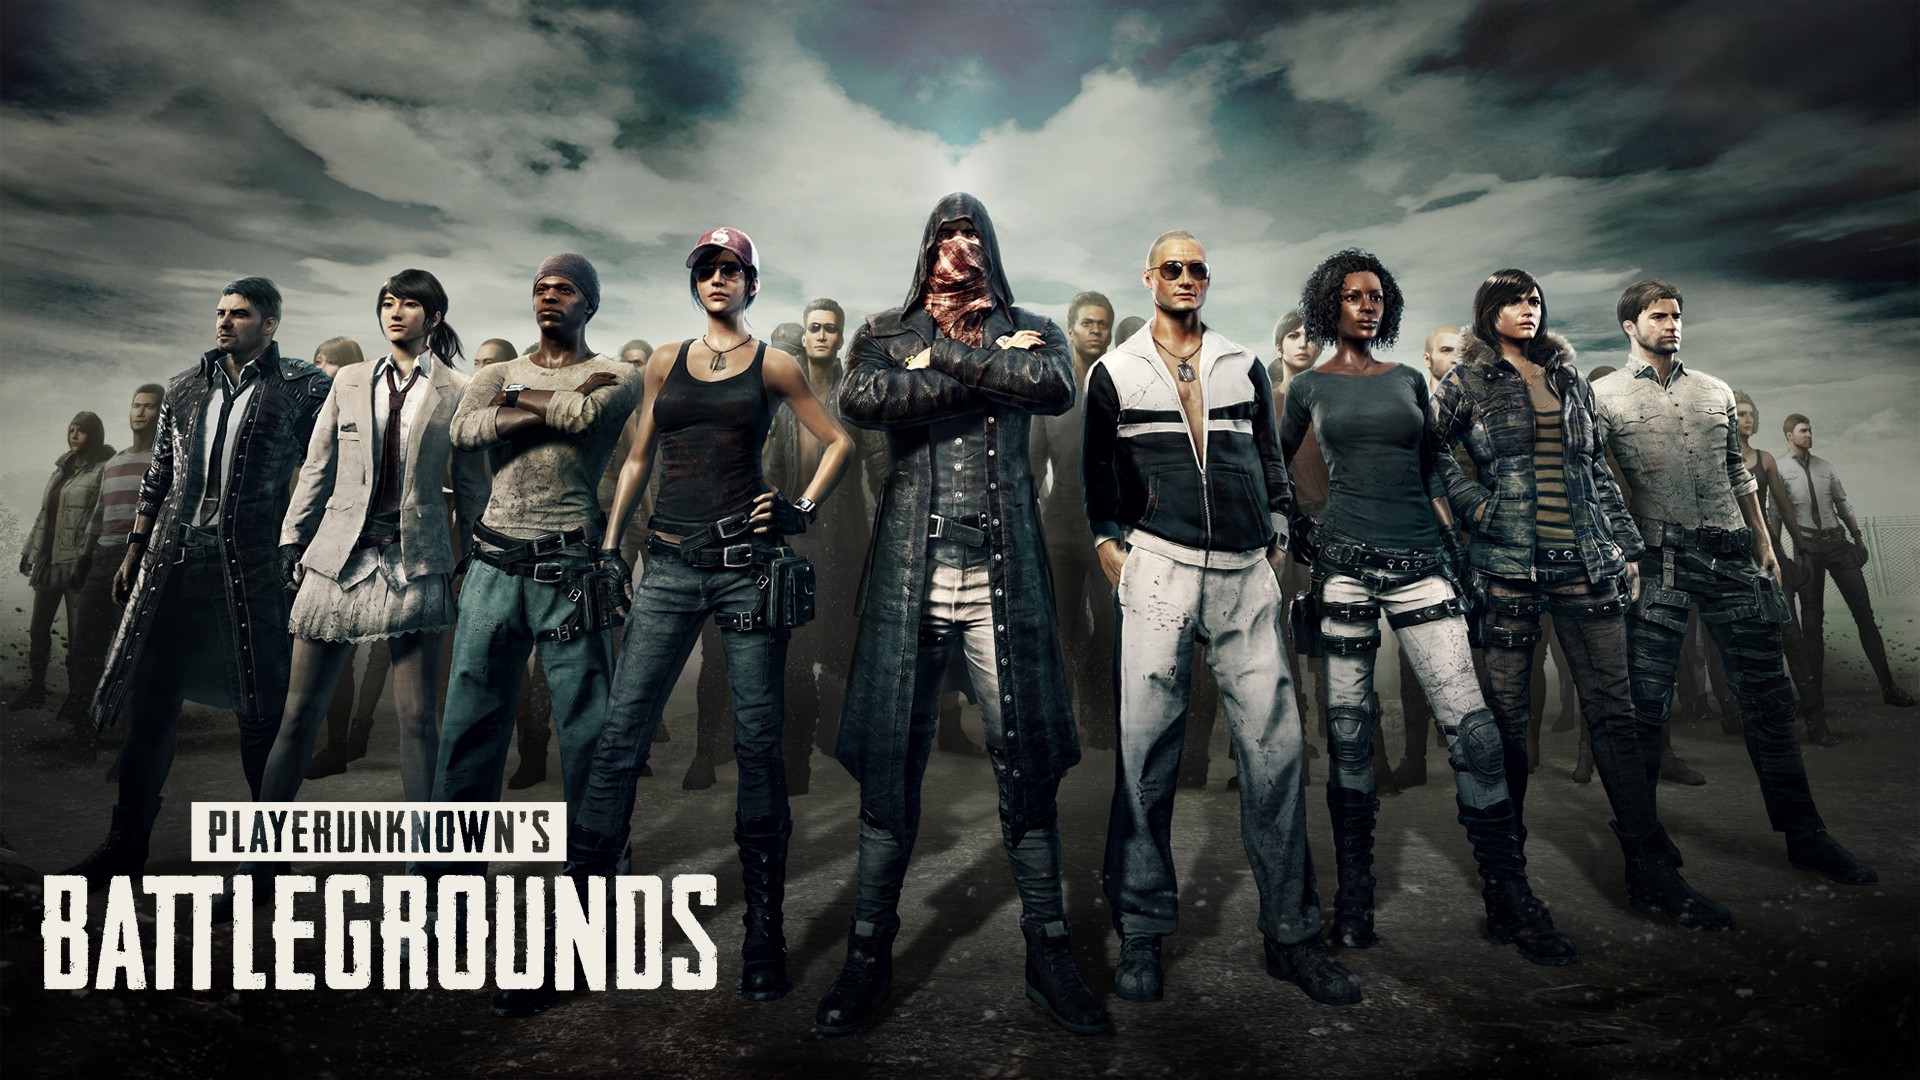 Wallpaper PUBG New Update Desktop with resolution 1920X1080 pixel. You can use this wallpaper as background for your desktop Computer Screensavers, Android or iPhone smartphones